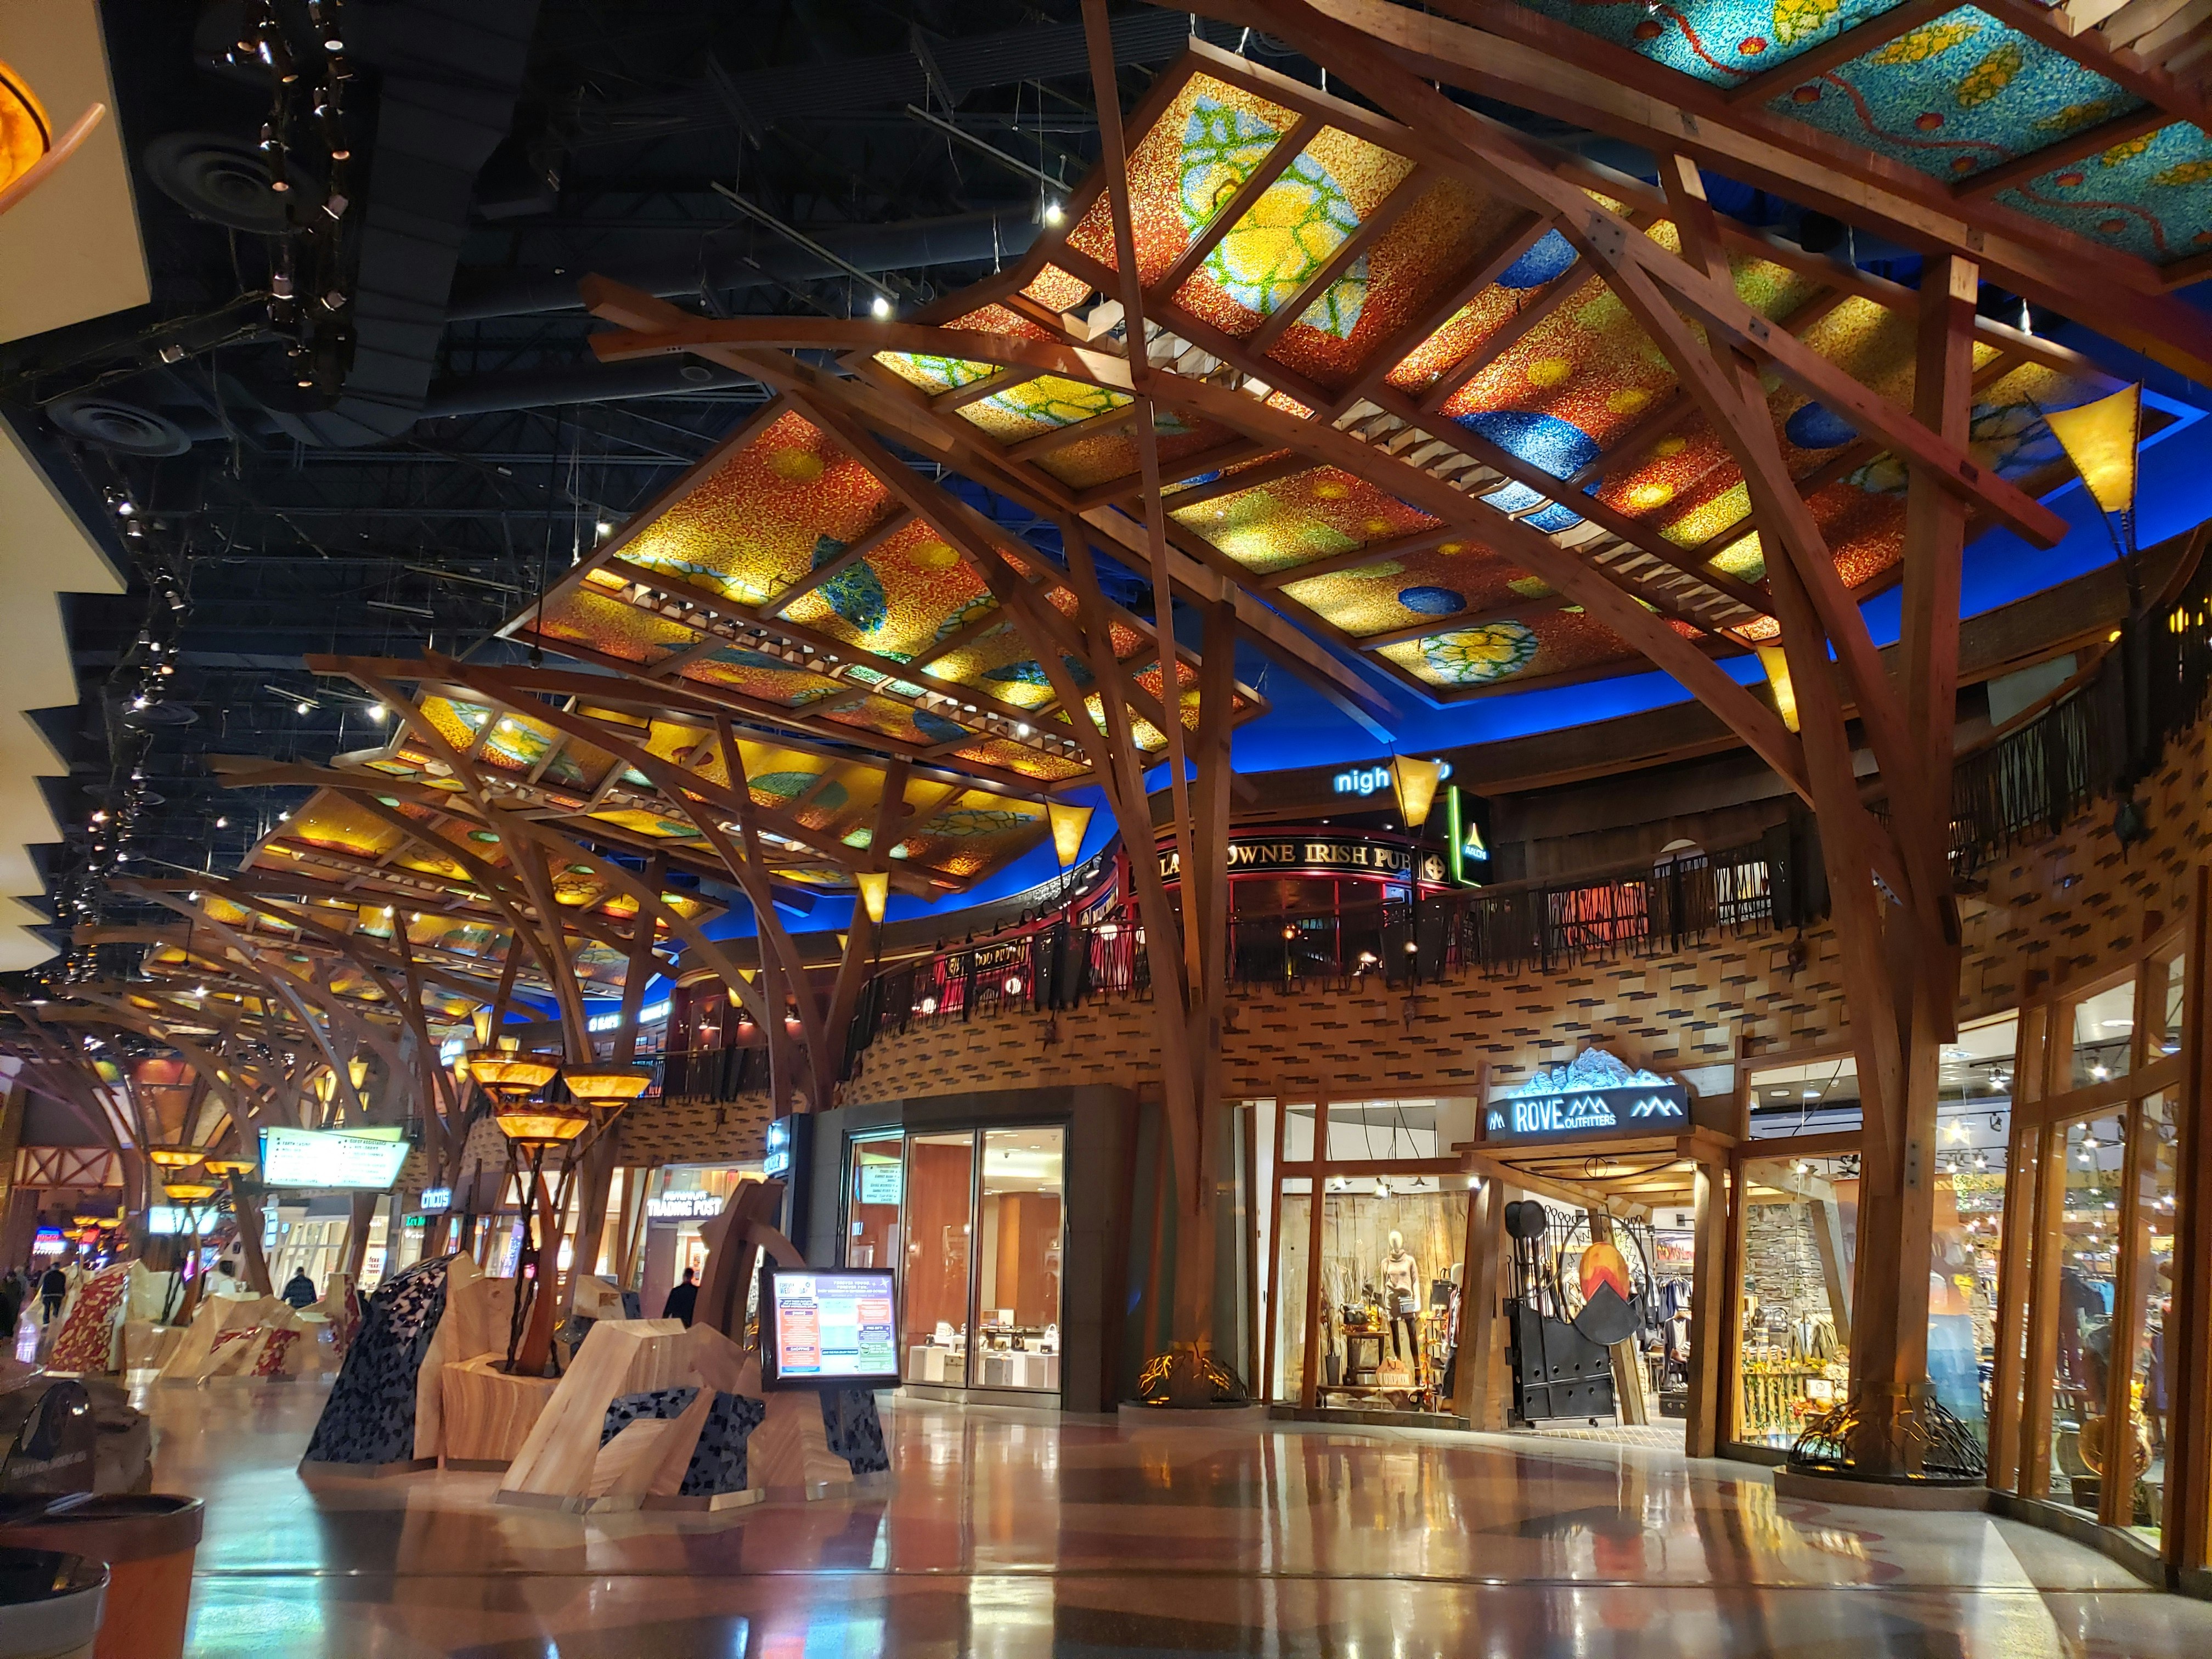 The mall in Mohegan Sun Casino is made up of rows of storefronts, over which is a wrought-iron railing marking the second floor, where signs from more shops and an Irish pub gleam. Over the first-floor walkway are large stained glass awnings in colors of red, yellow, and blue in a blend of Craftsman and contemporary styles, supported by large wooden columns and rafters made of pine beams.